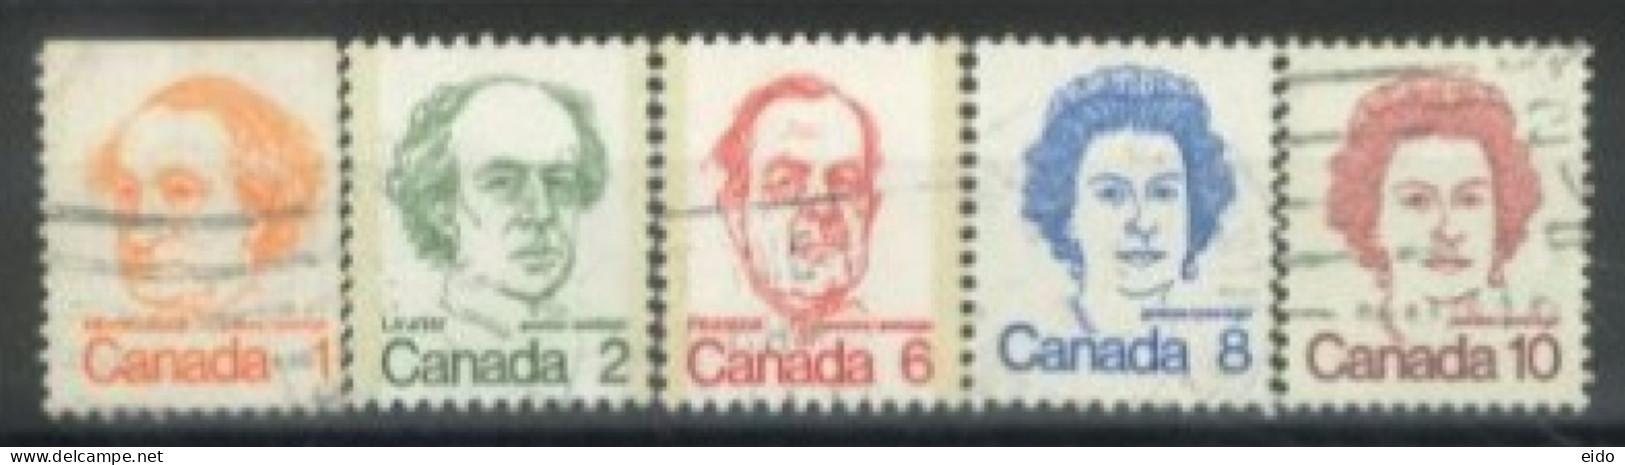 CANADA - 1972, CELEBRITIES STAMPS SET OF 5, USED. - Used Stamps